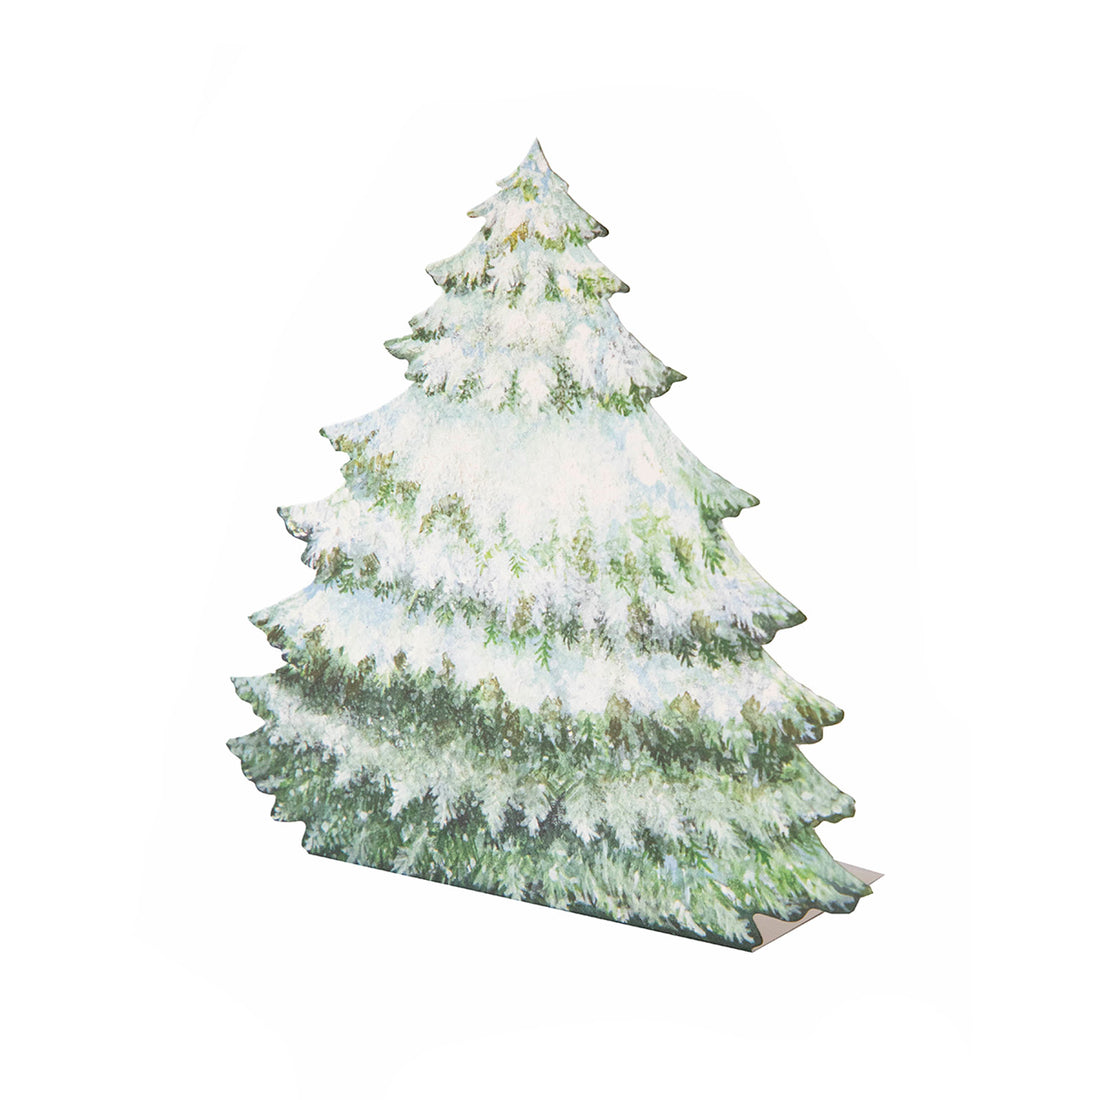 A die-cut freestanding place card featuring an illustrated evergreen tree covered in snow, providing a blank space for a hand-written message.